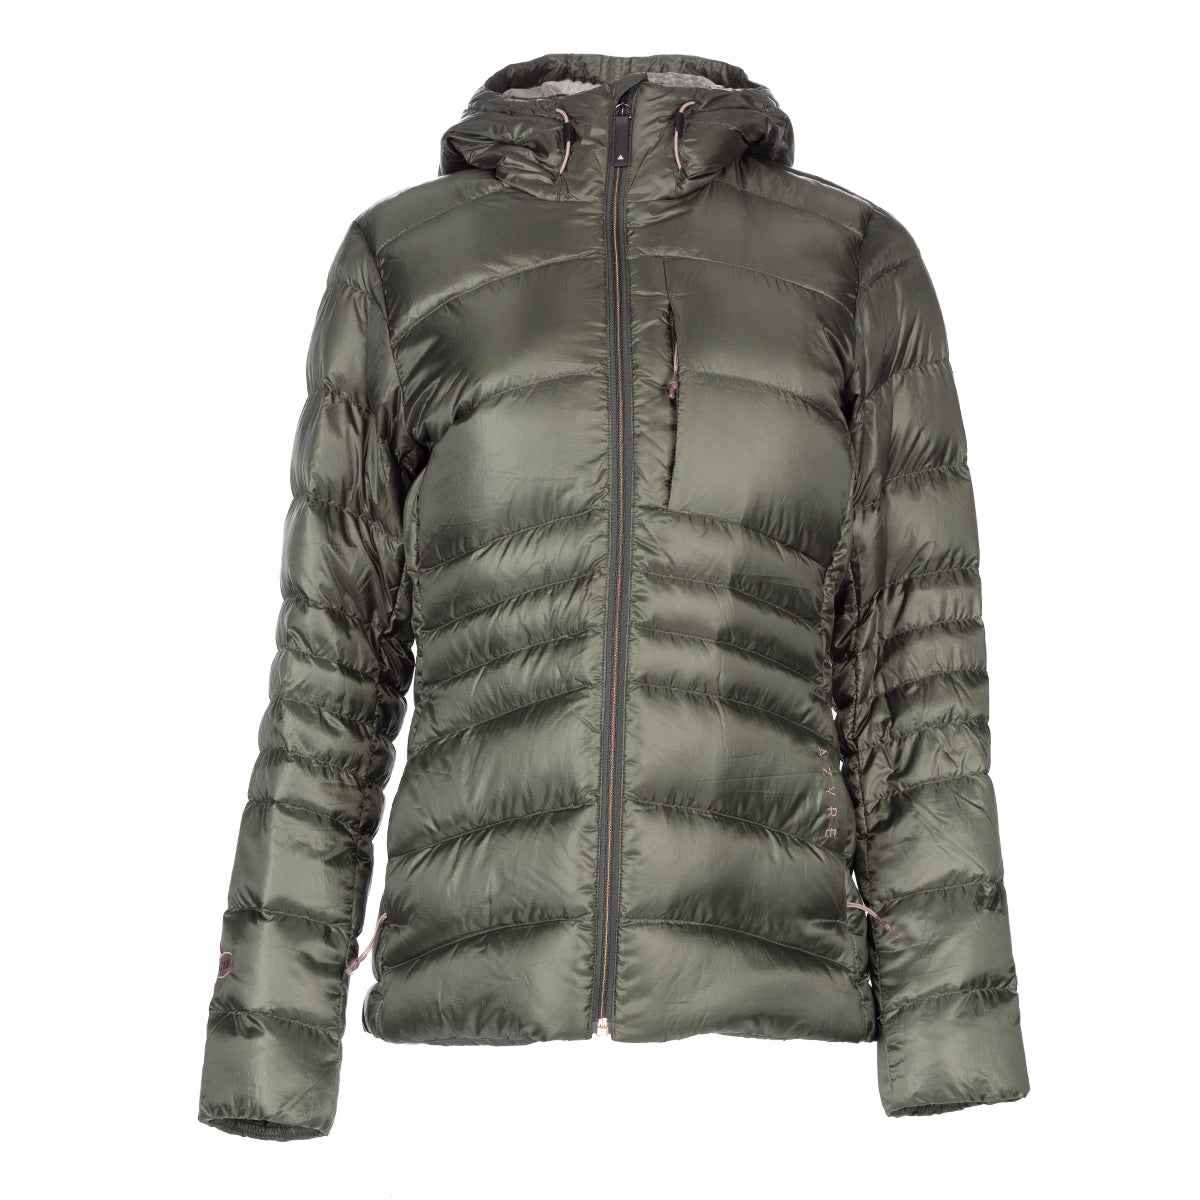 Azyre Believe Packable Down Jacket in  by GOHUNT | Azyre - GOHUNT Shop